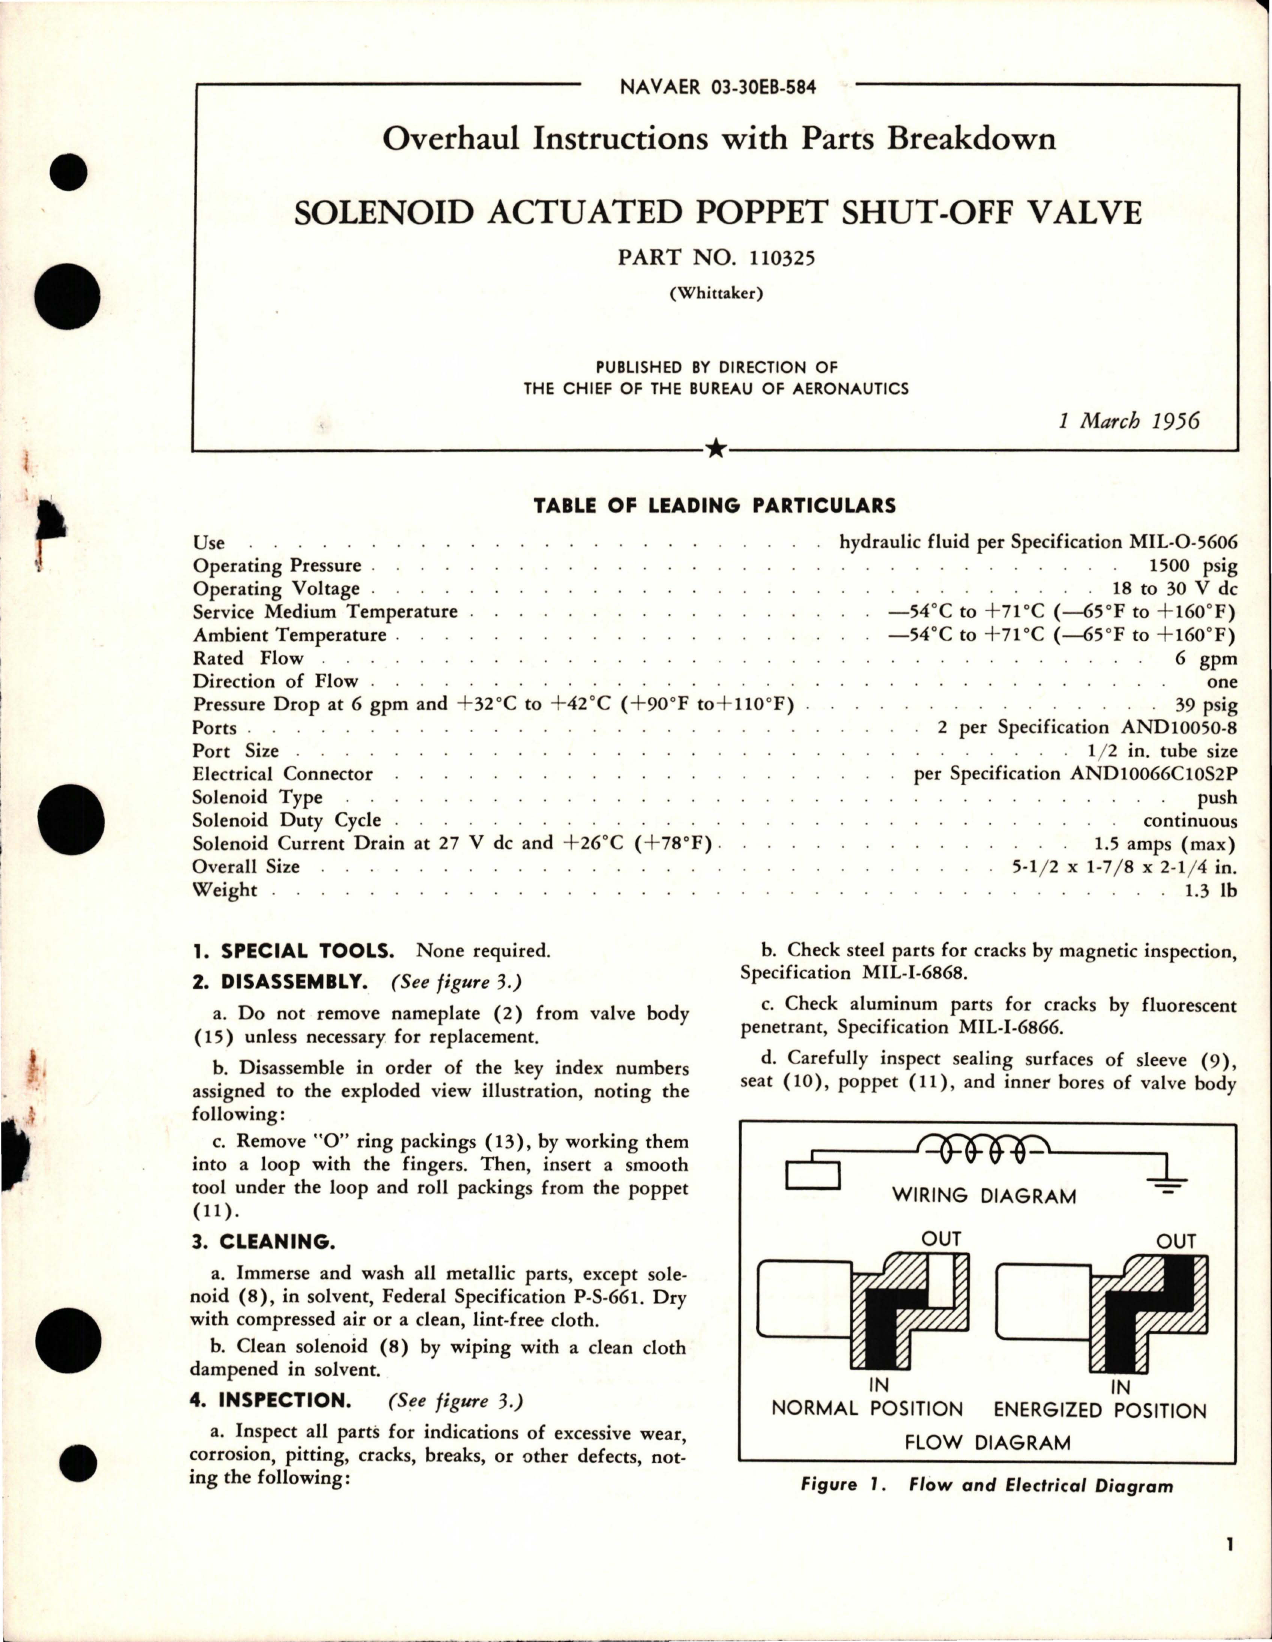 Sample page 1 from AirCorps Library document: Overhaul Instructions with Parts Breakdown for Solenoid Actuated Poppet Shut-Off Valve - Part 110325